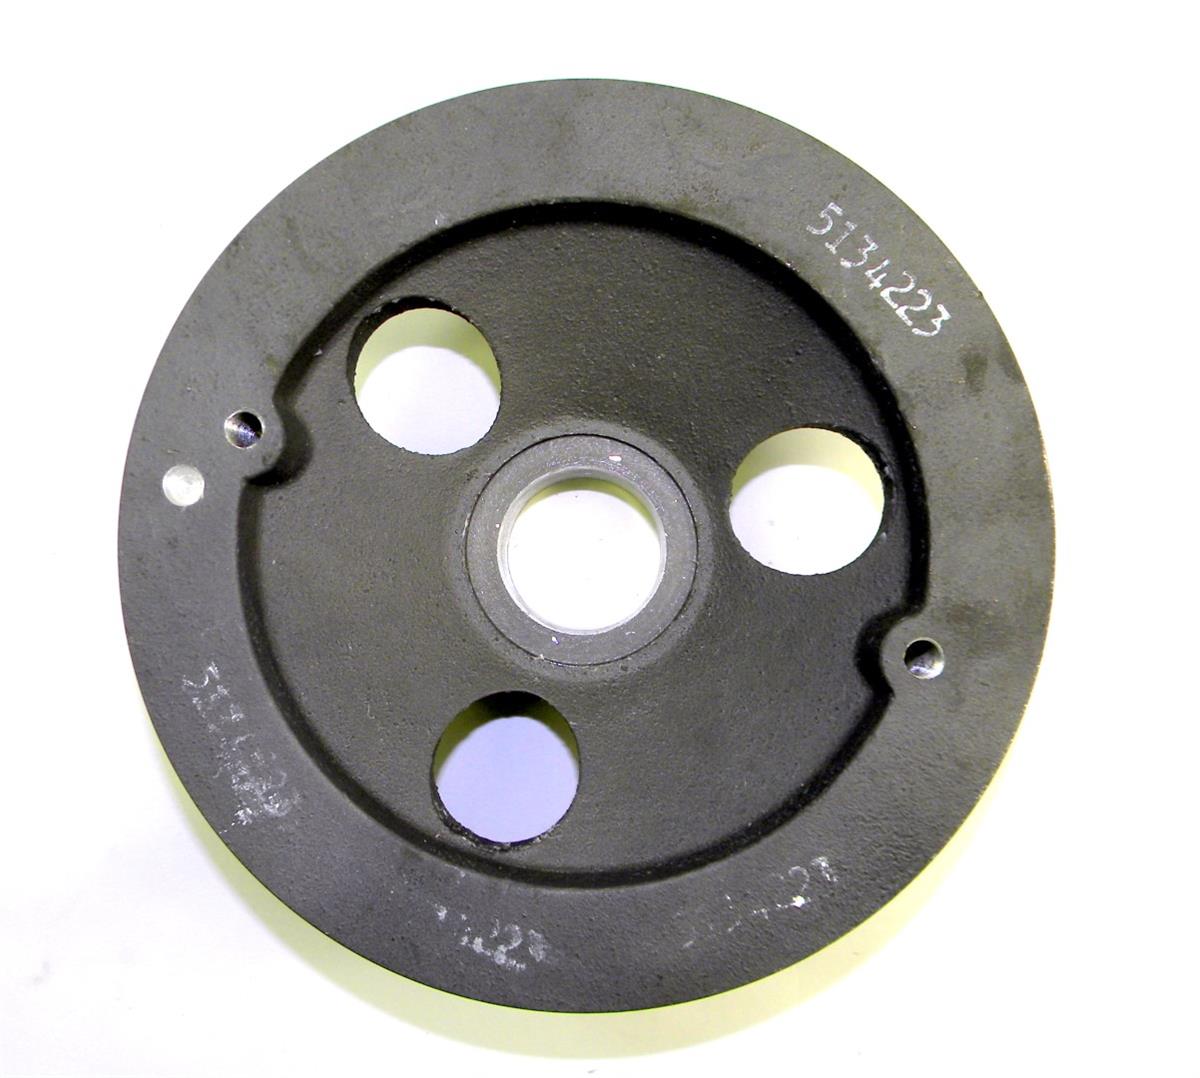 SP-1657 | 3020-00-103-4547 two groove crankshaft pulley for M561 Gama Goat NOS.  (5).JPG